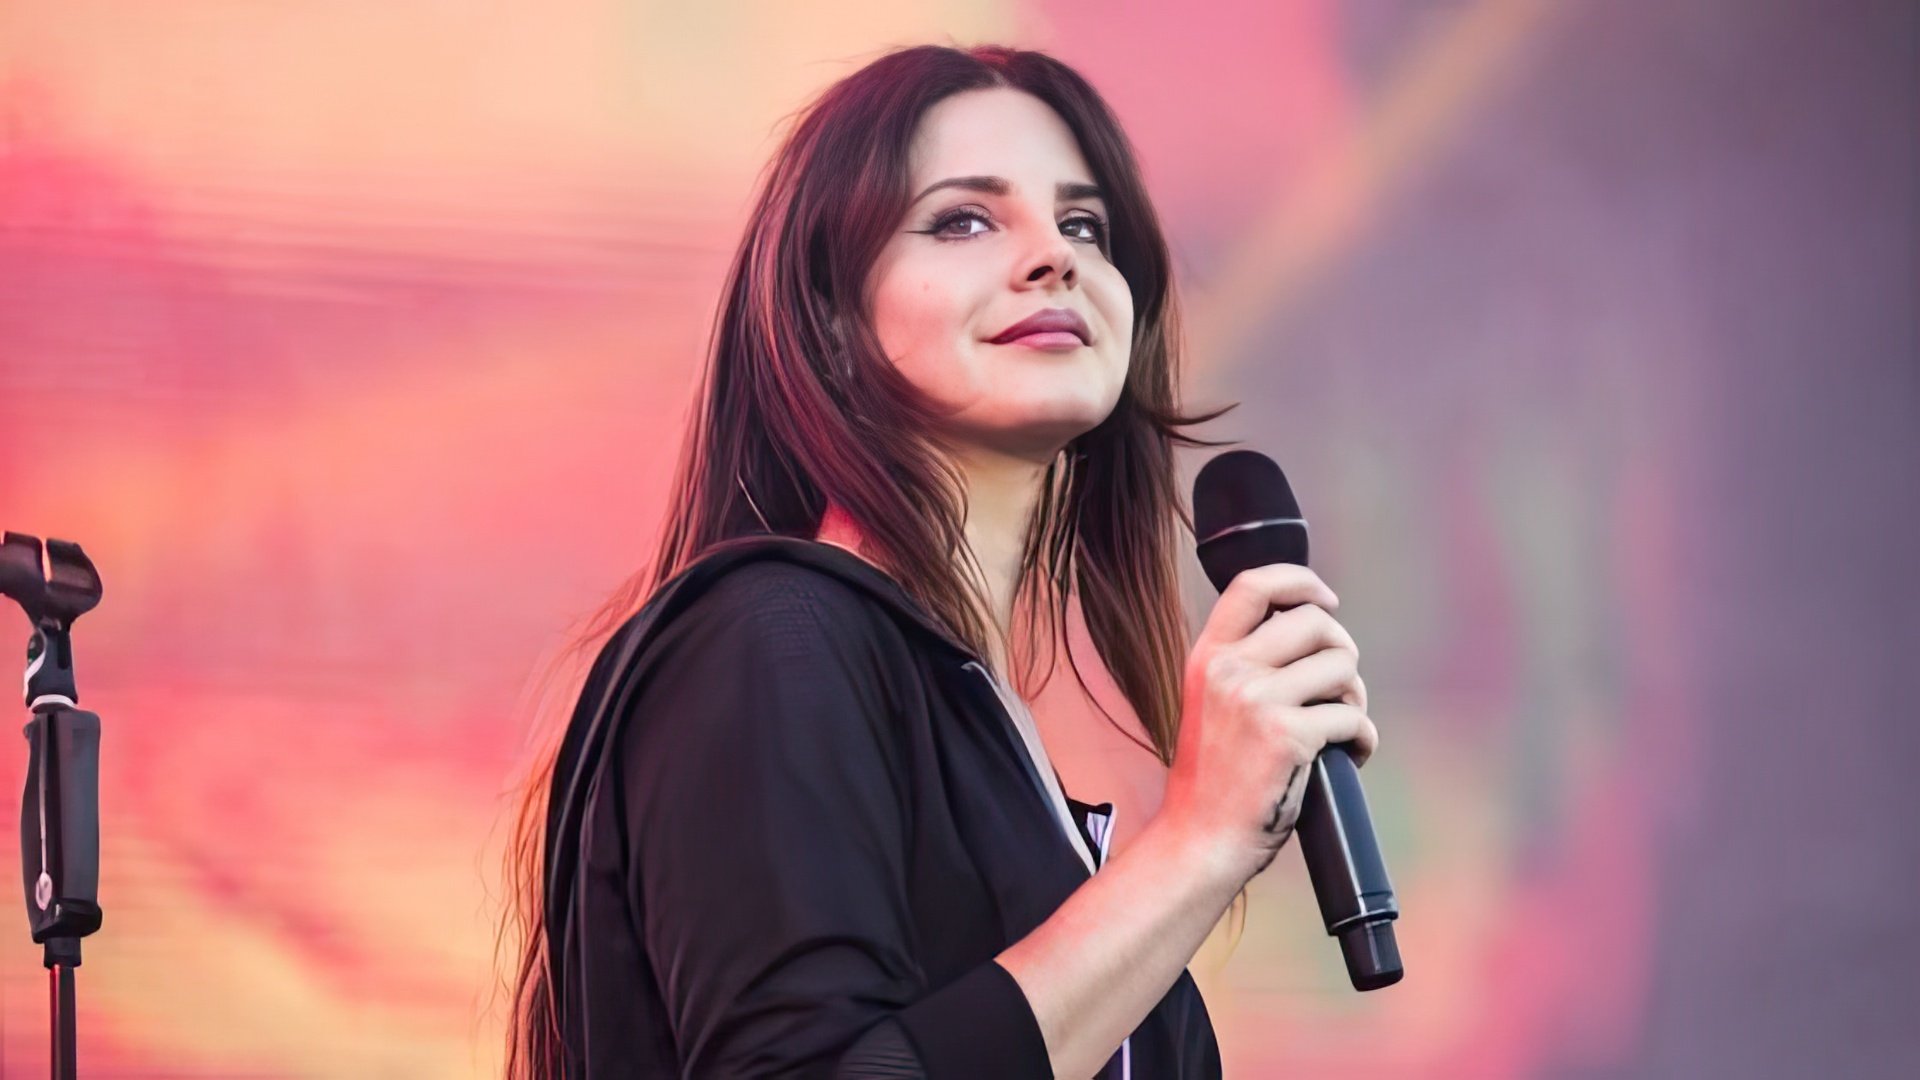 In 2018, Lana organized the world tour in support of her new album